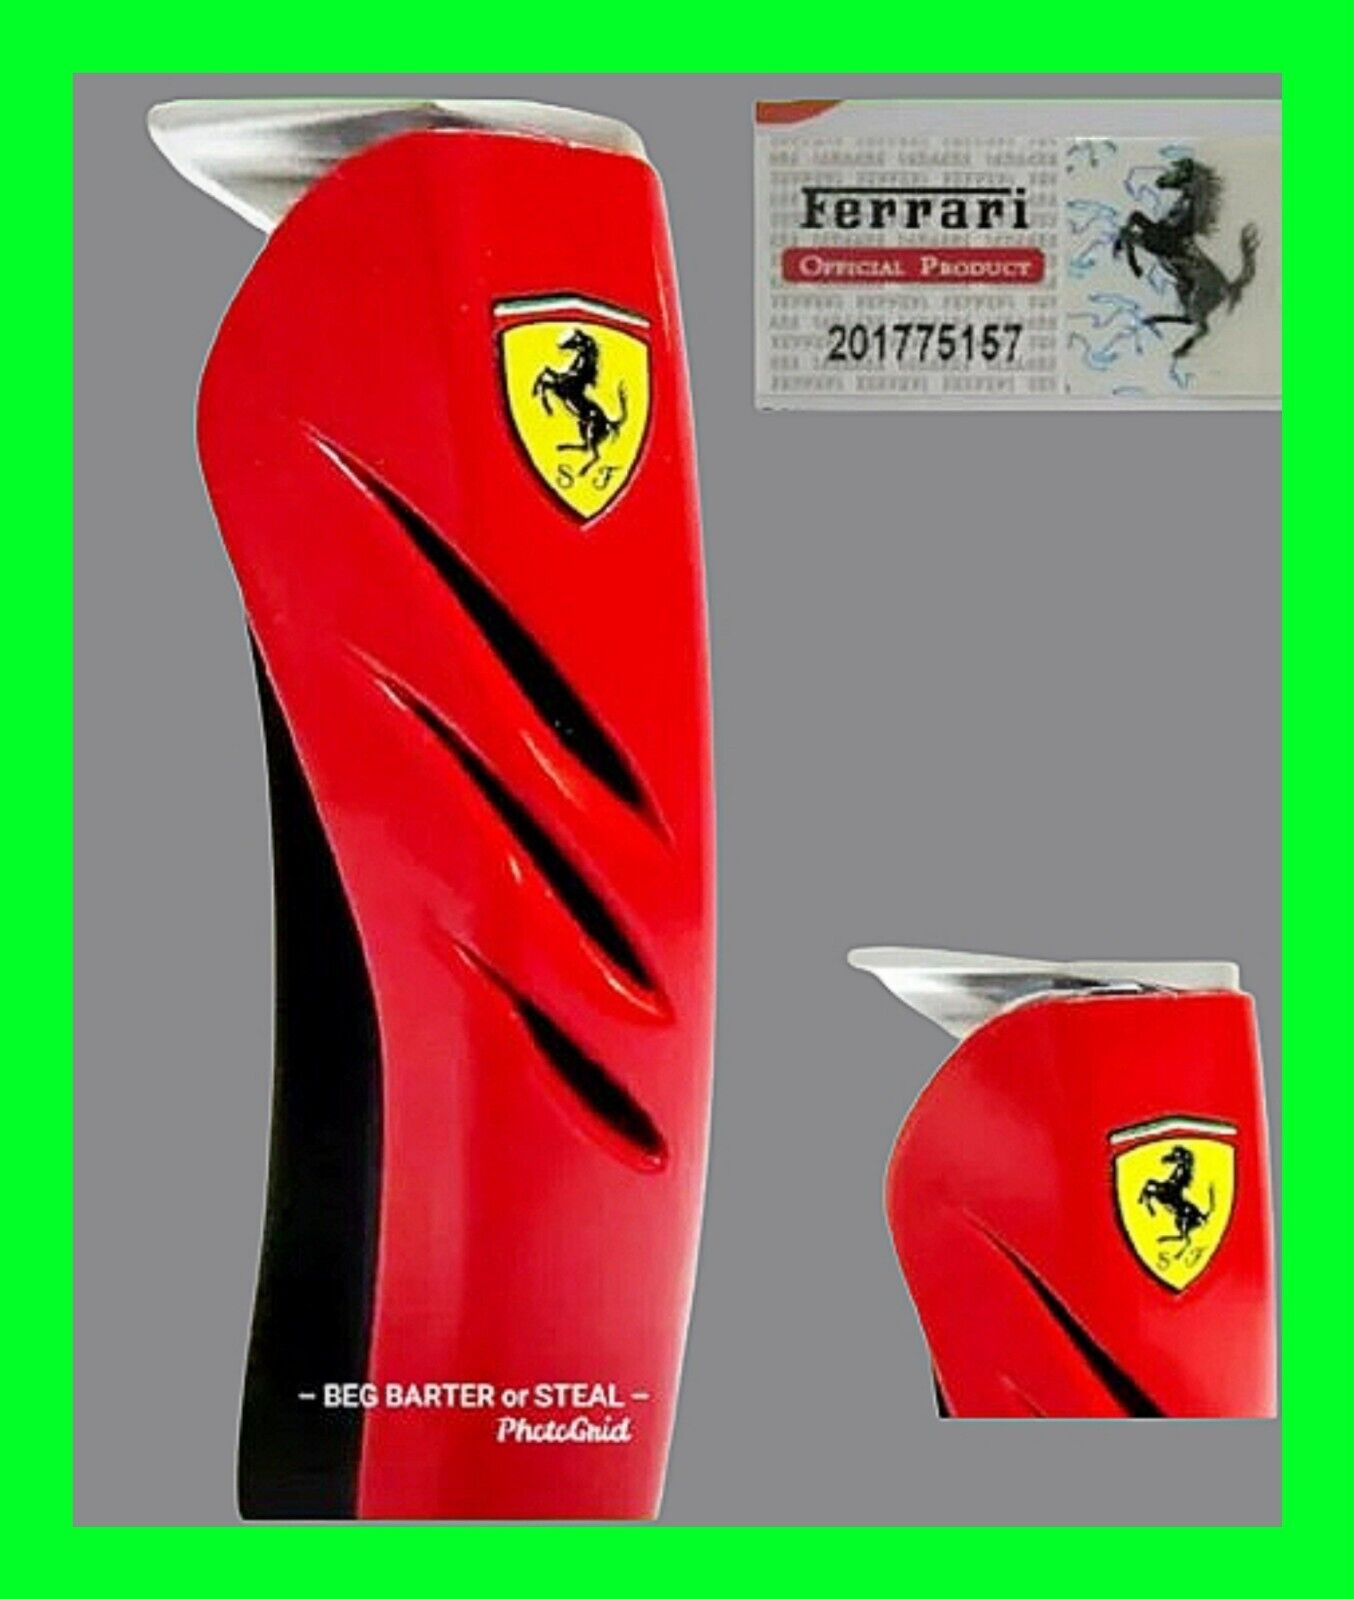 New Limited Edition Ferrari Red Metal Cigar Lighter With Paperwork - Refillable 